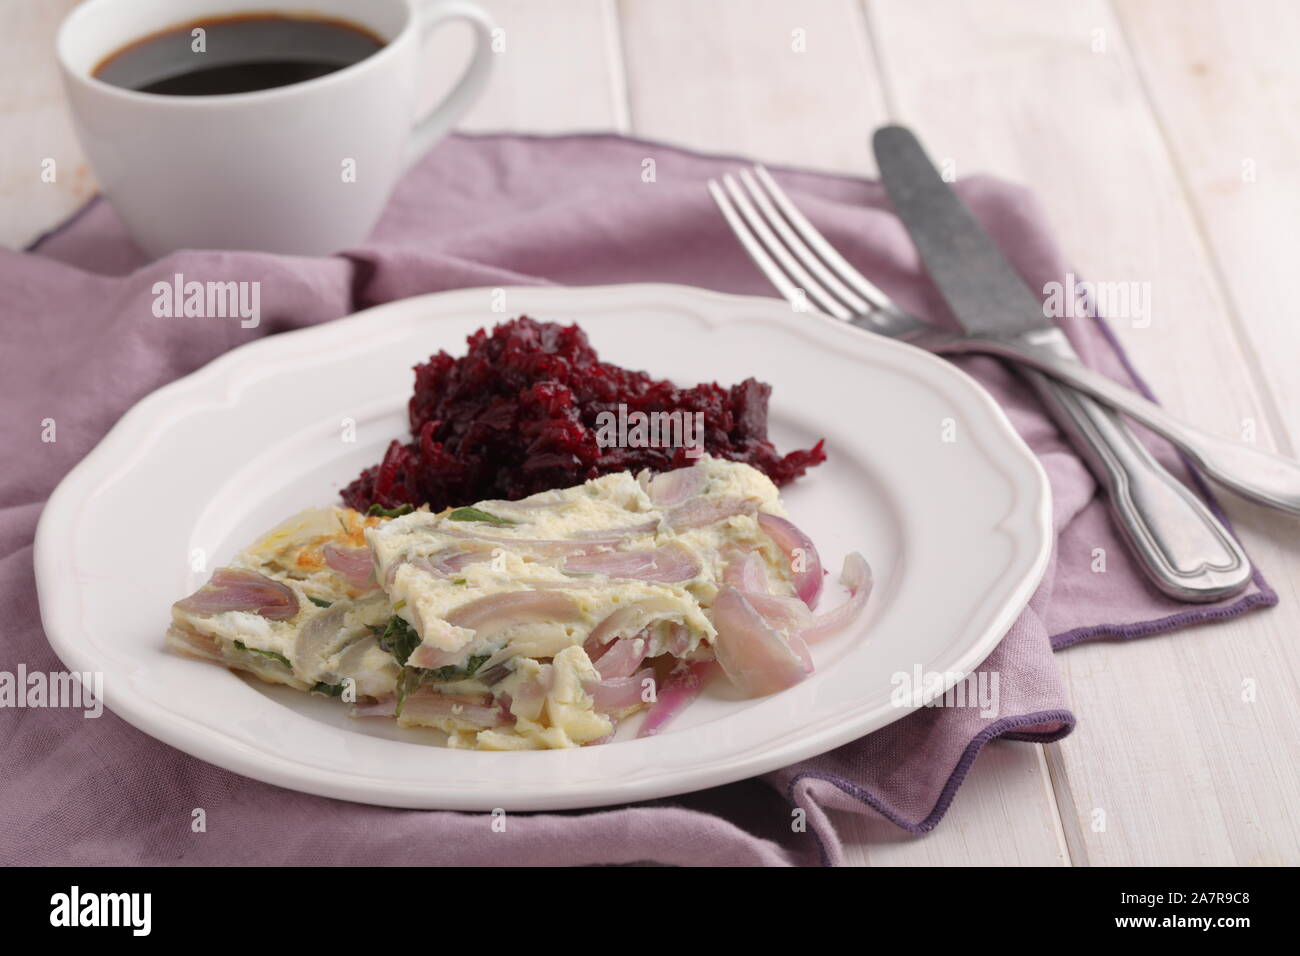 Omelet with red onion and beetroot salad. Healthy breakfast concept Stock Photo